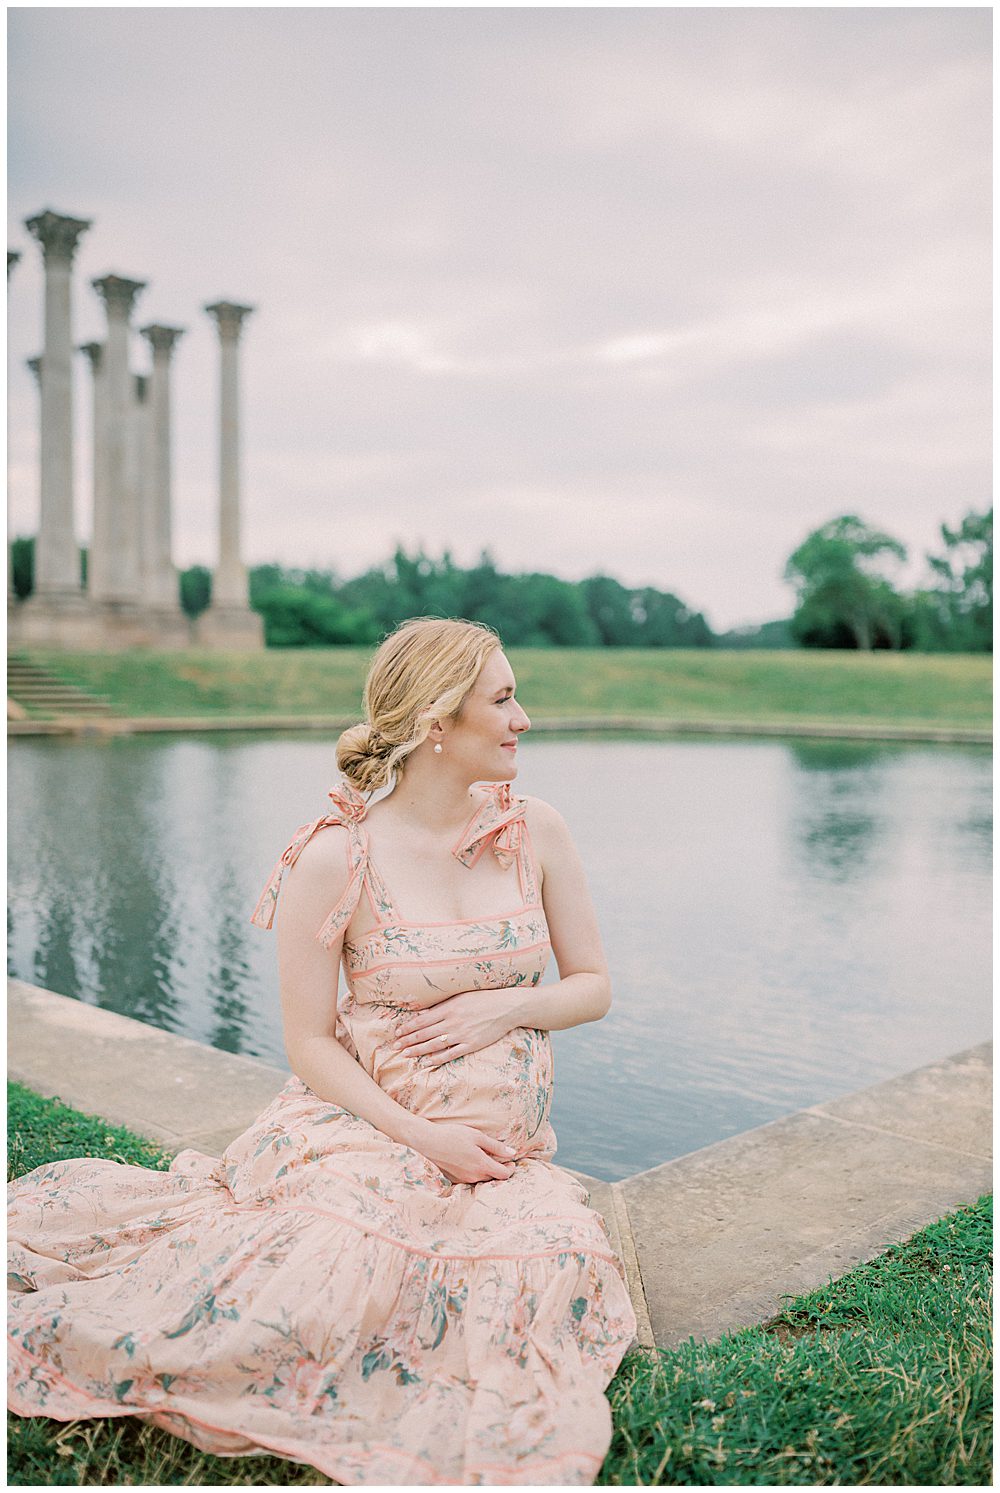 Pregnant mother sits in front of the National Arboretum pond, smiling off into the distance.